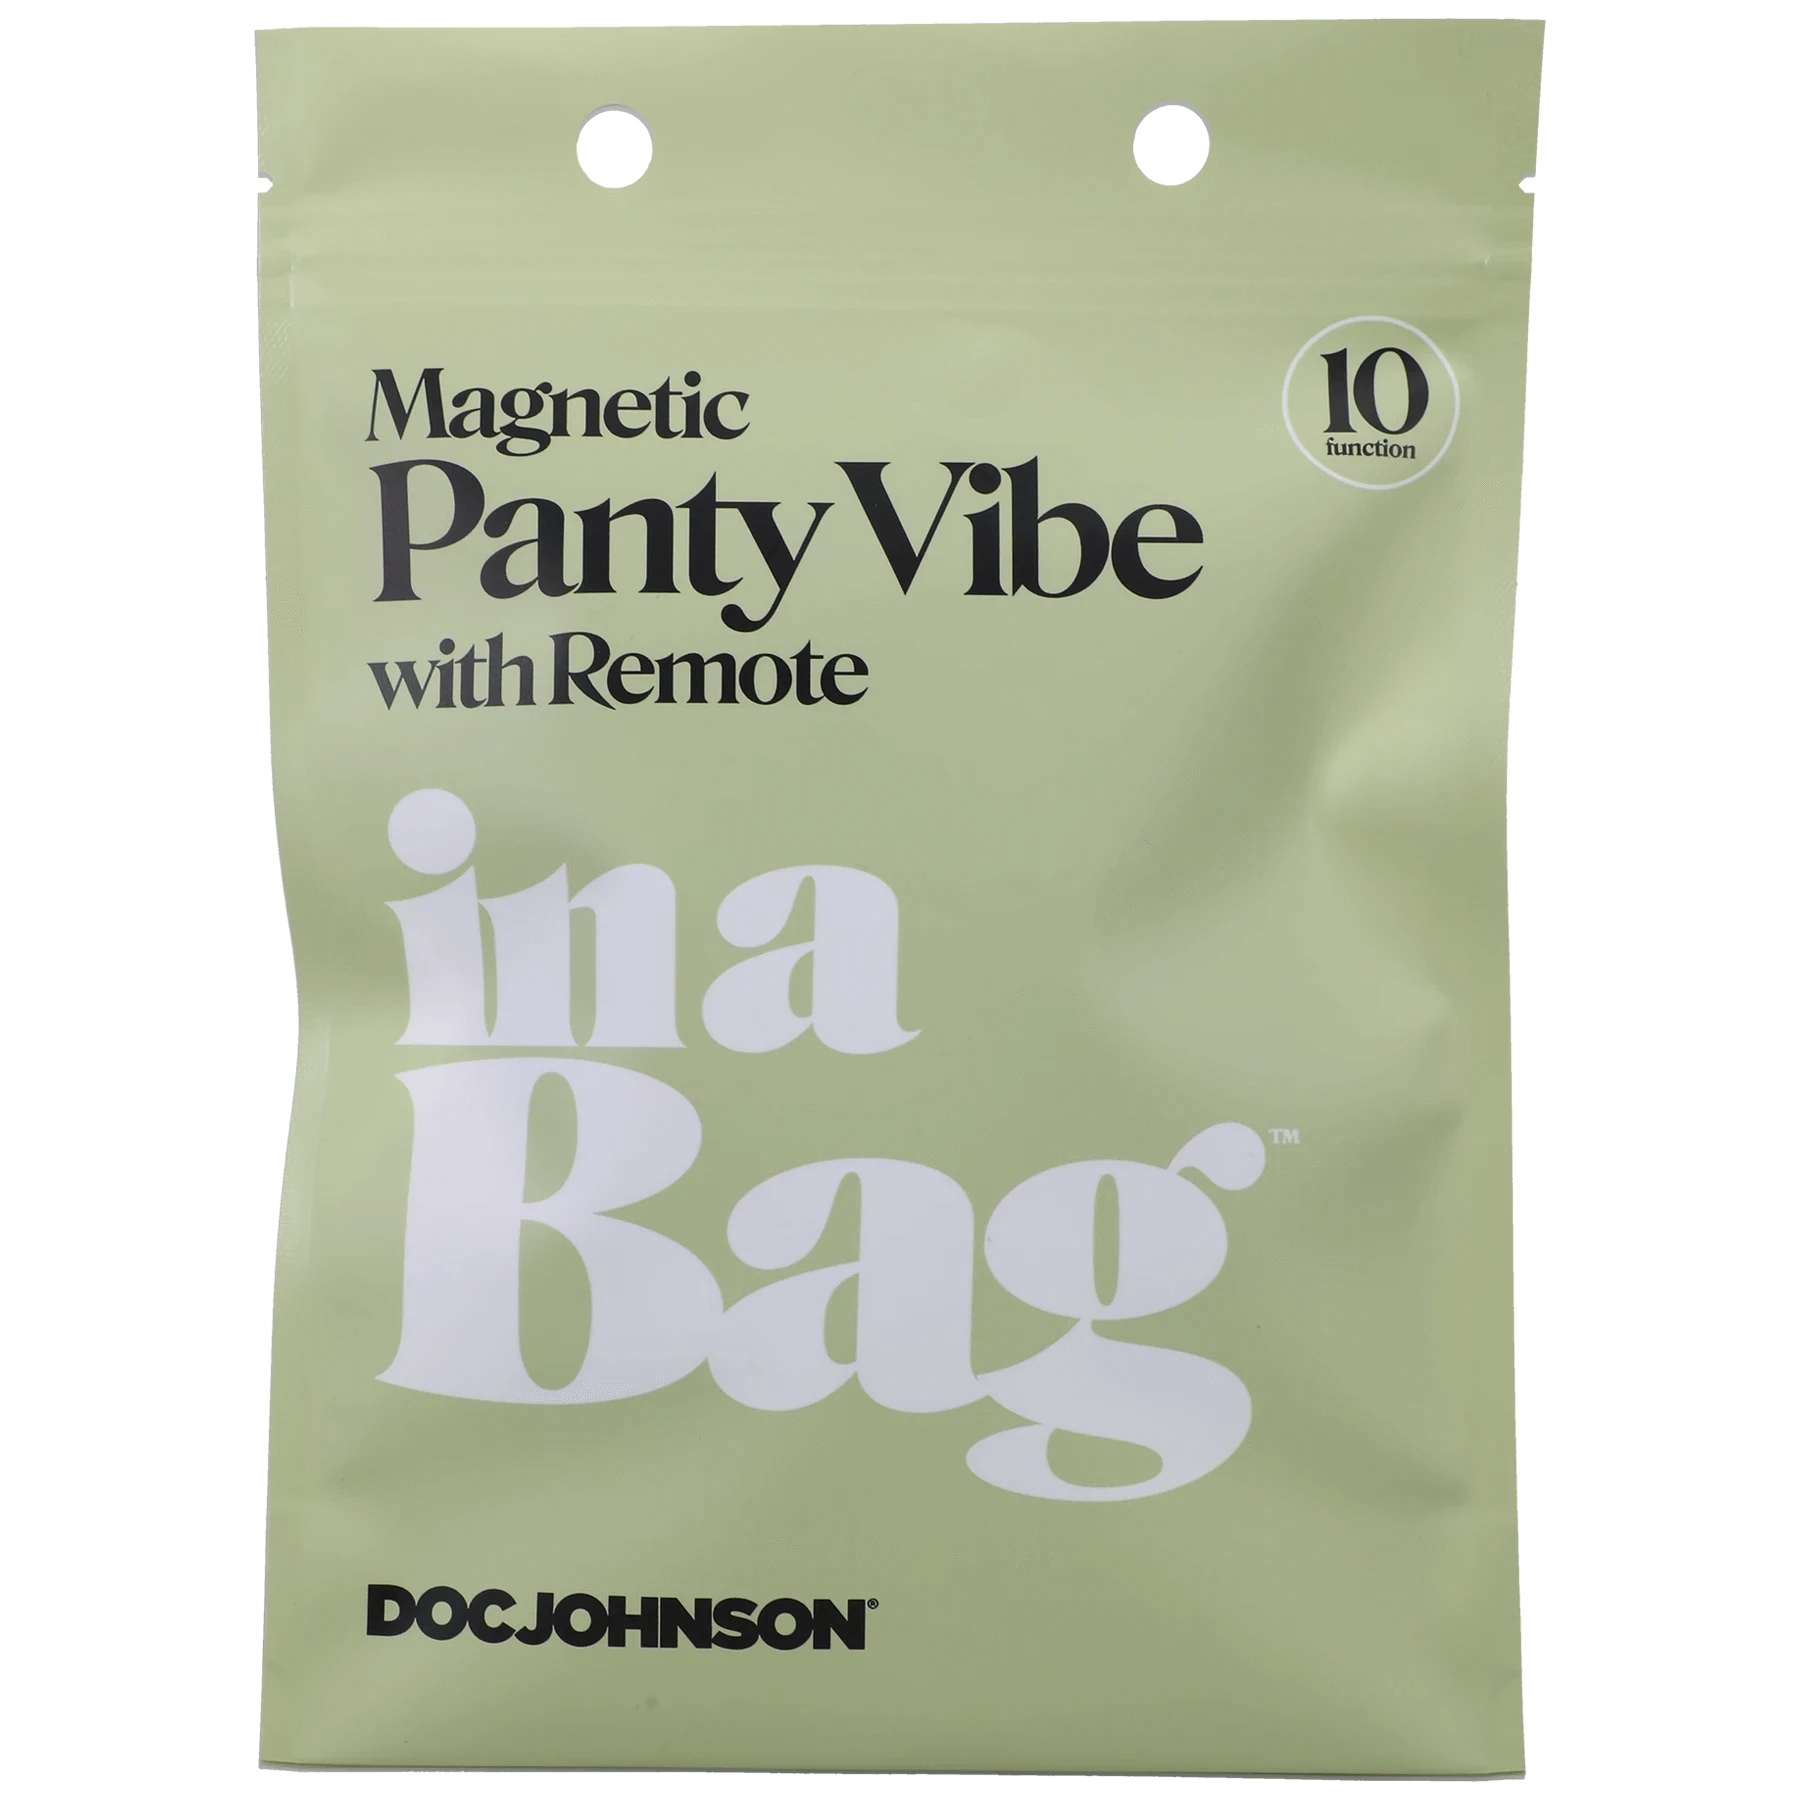 In a Bag Magnetic Panty Vibe with Remote